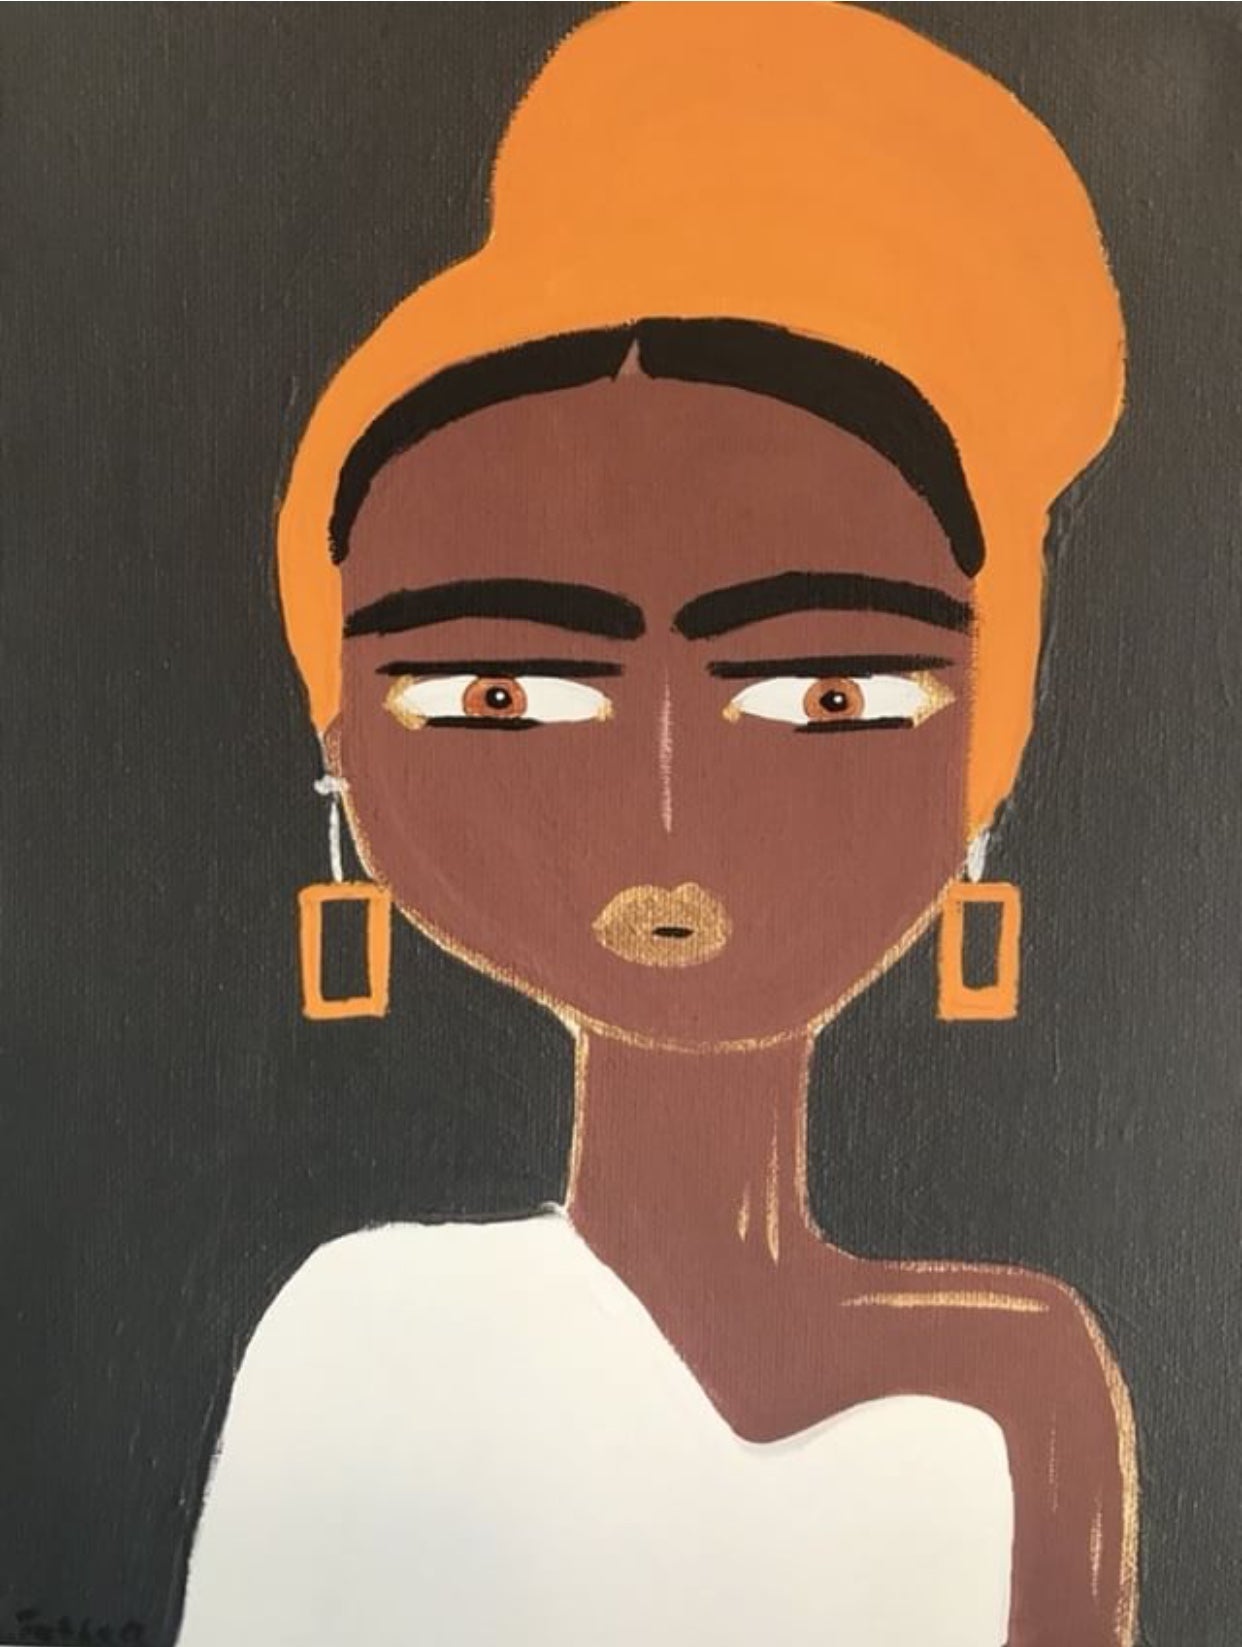 Tangerine – African Inspired Woman